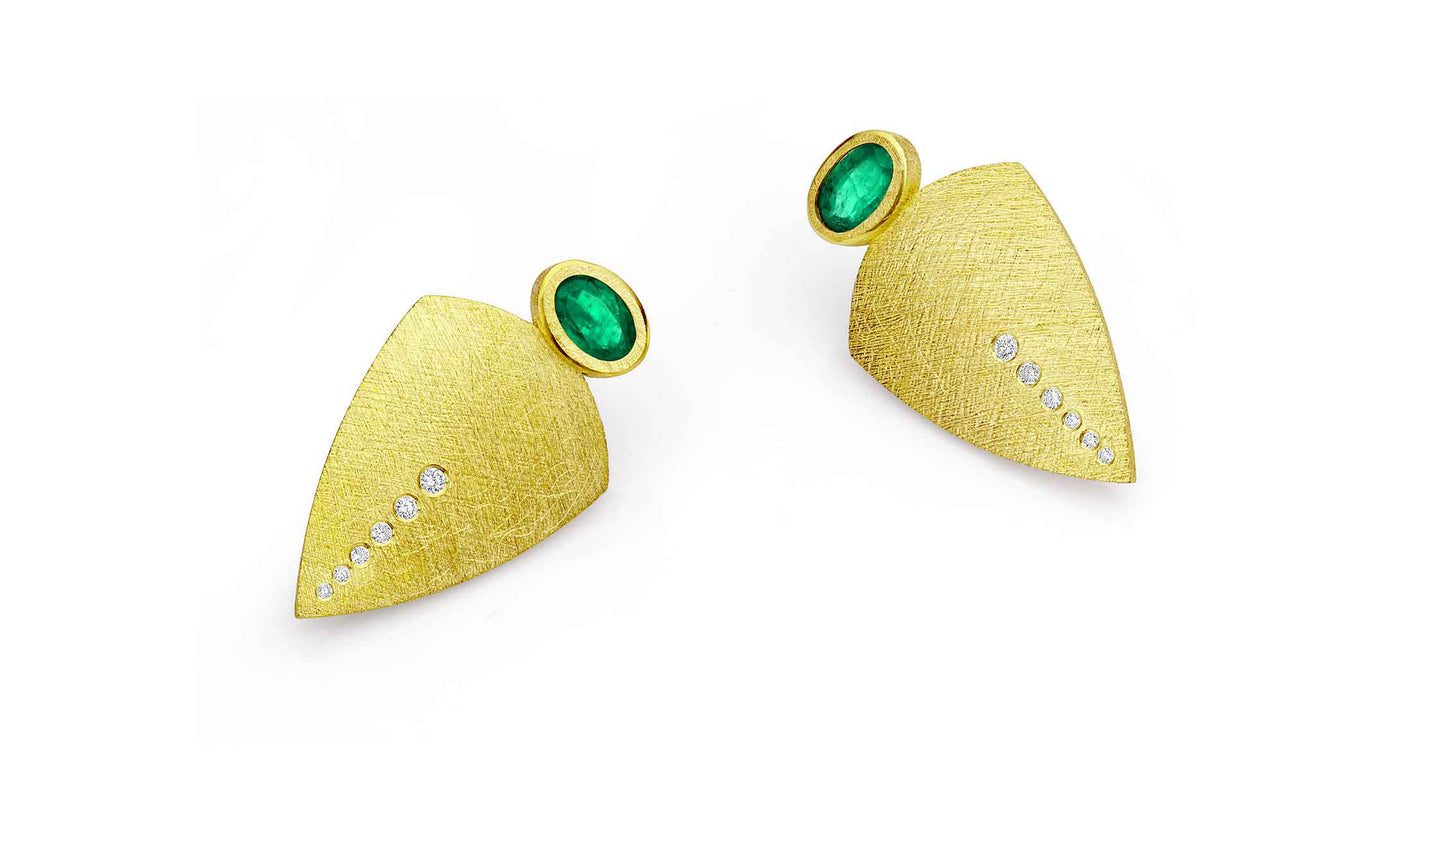 Shield Gold Earrings with Diamonds & Emeralds